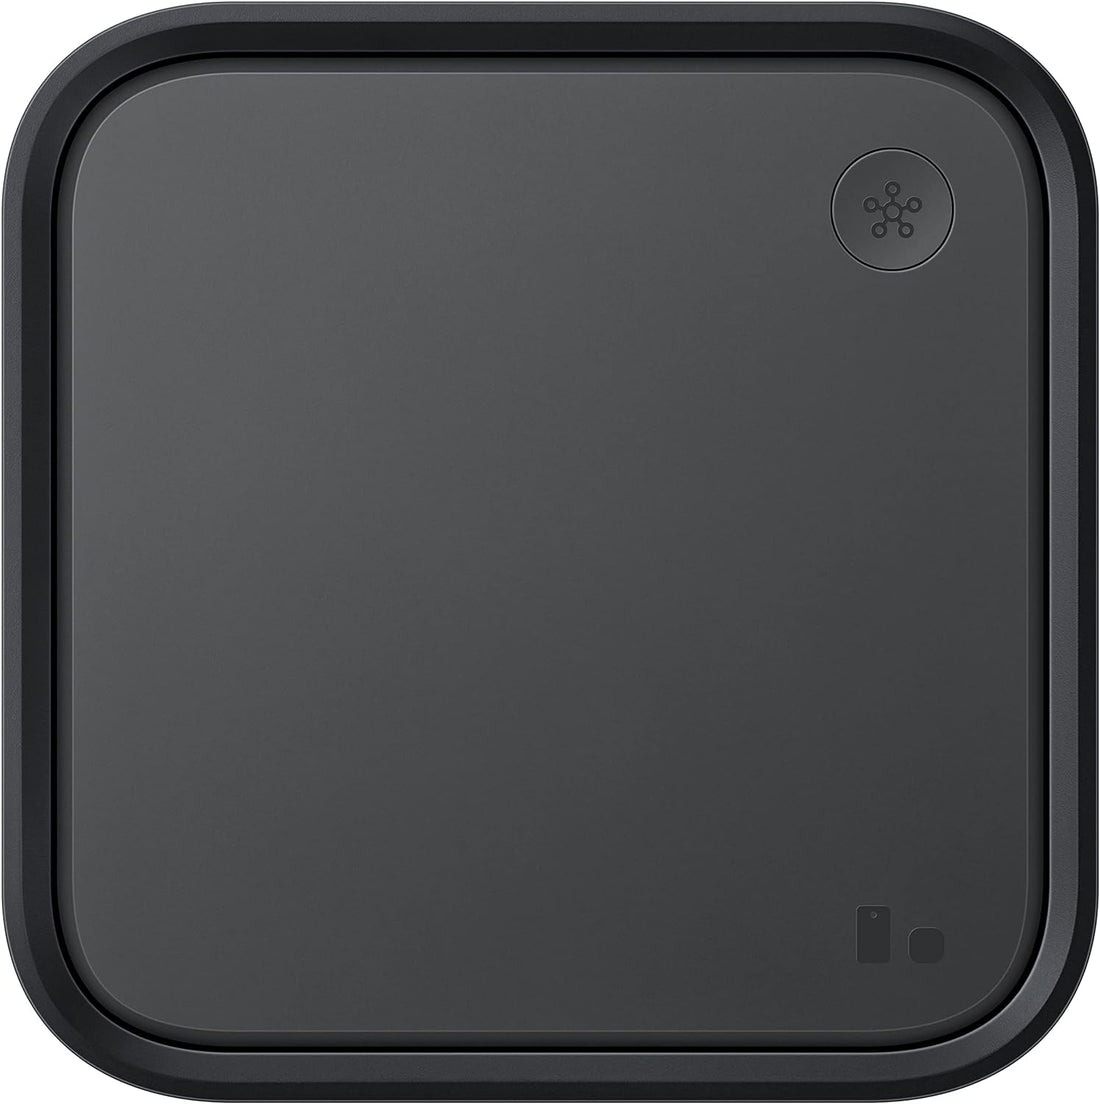 SmartThings Station with Power Adapter, 15W Super Fast Wireless Charger - Black (New)